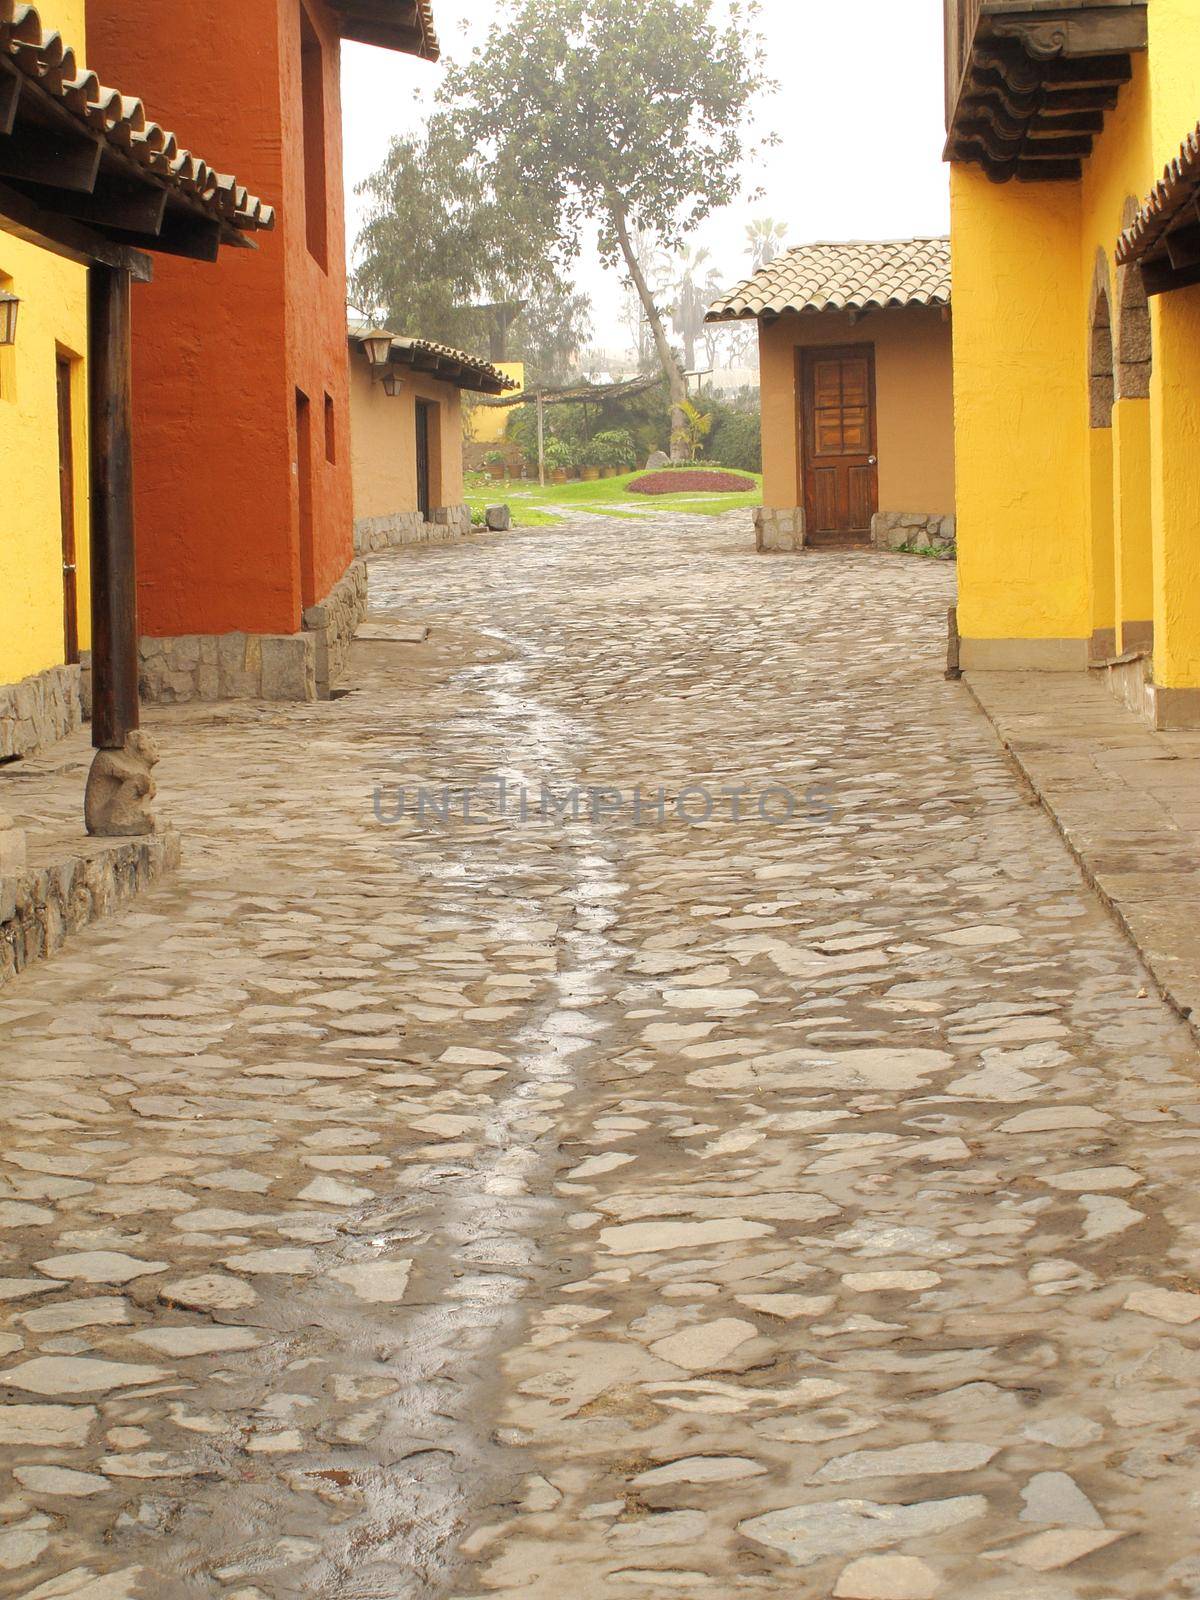 Old town house view. Peru by aroas